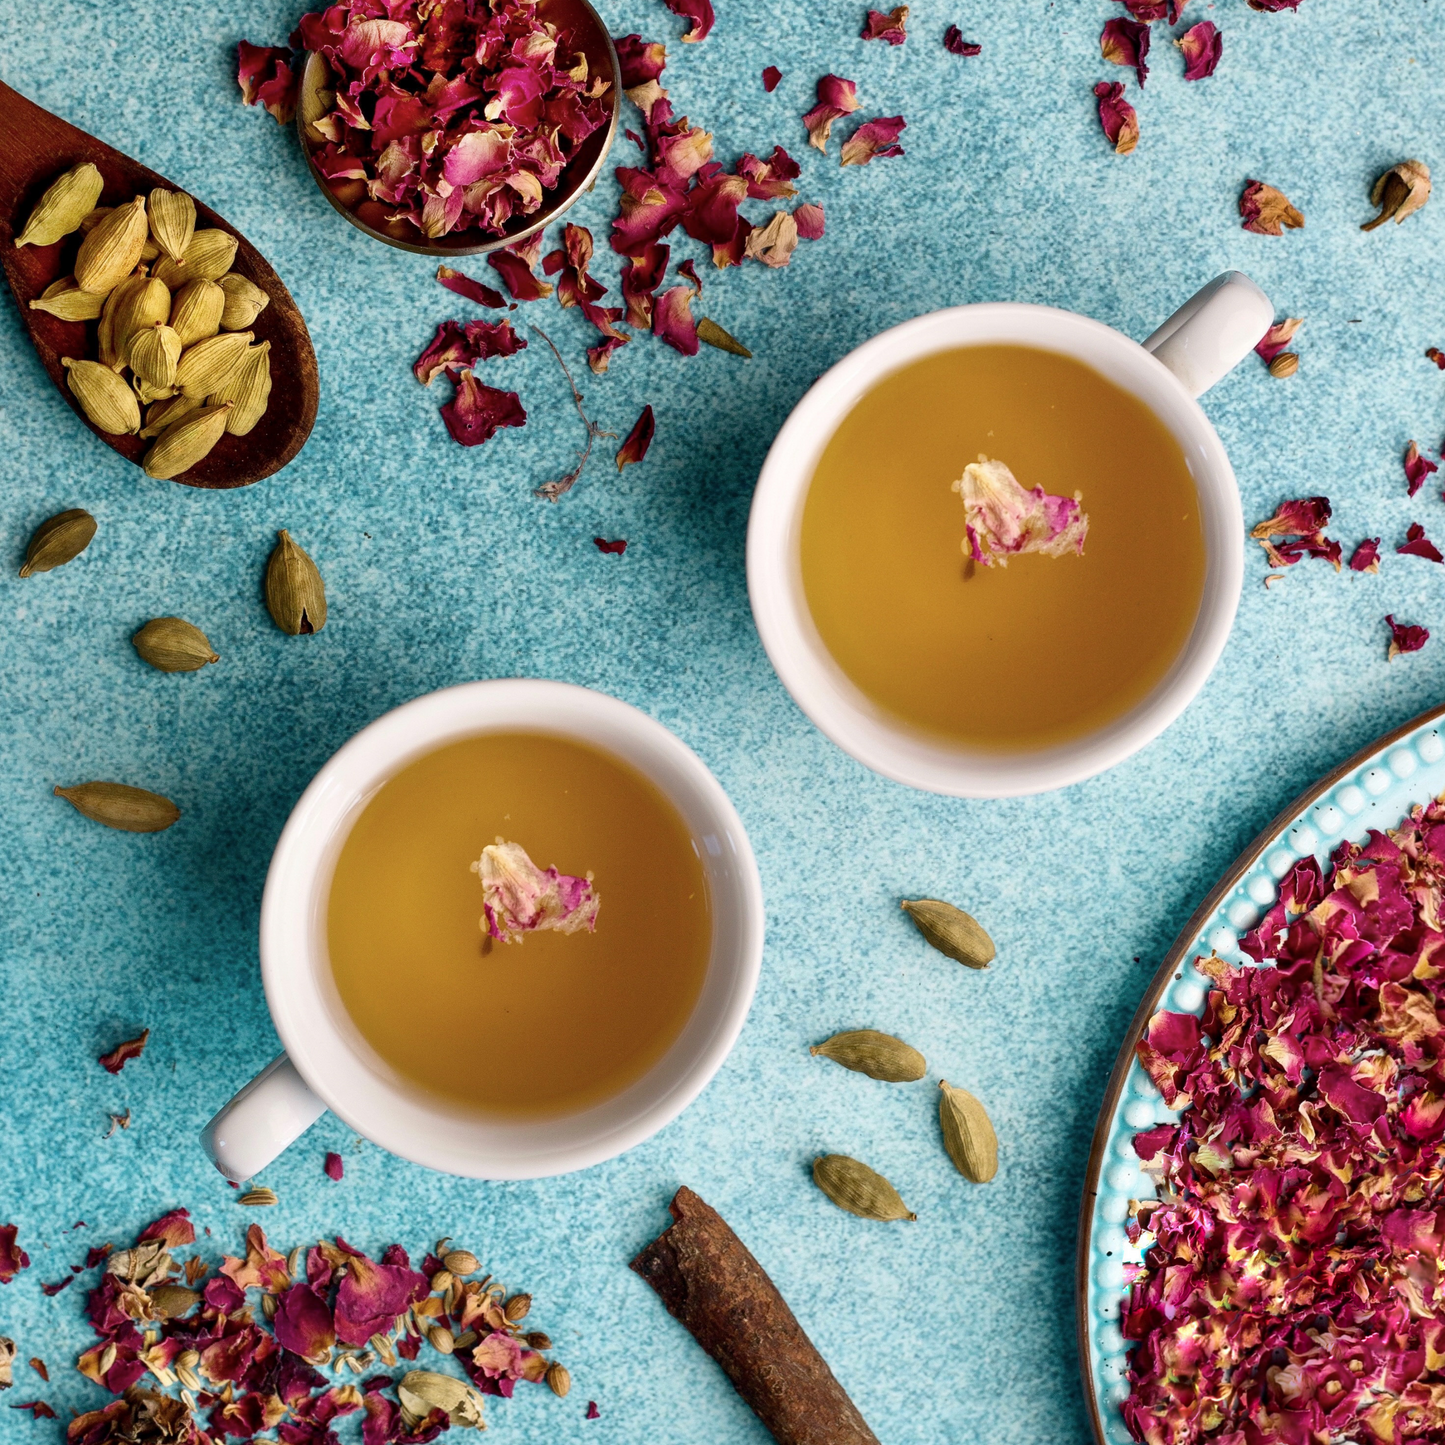 organic ingredients used in ayursome foods' cup it cool tea, including rose, cardamom, licorice root tea. the ingredients and the brewed herbal tea are shot against a soothing blue background